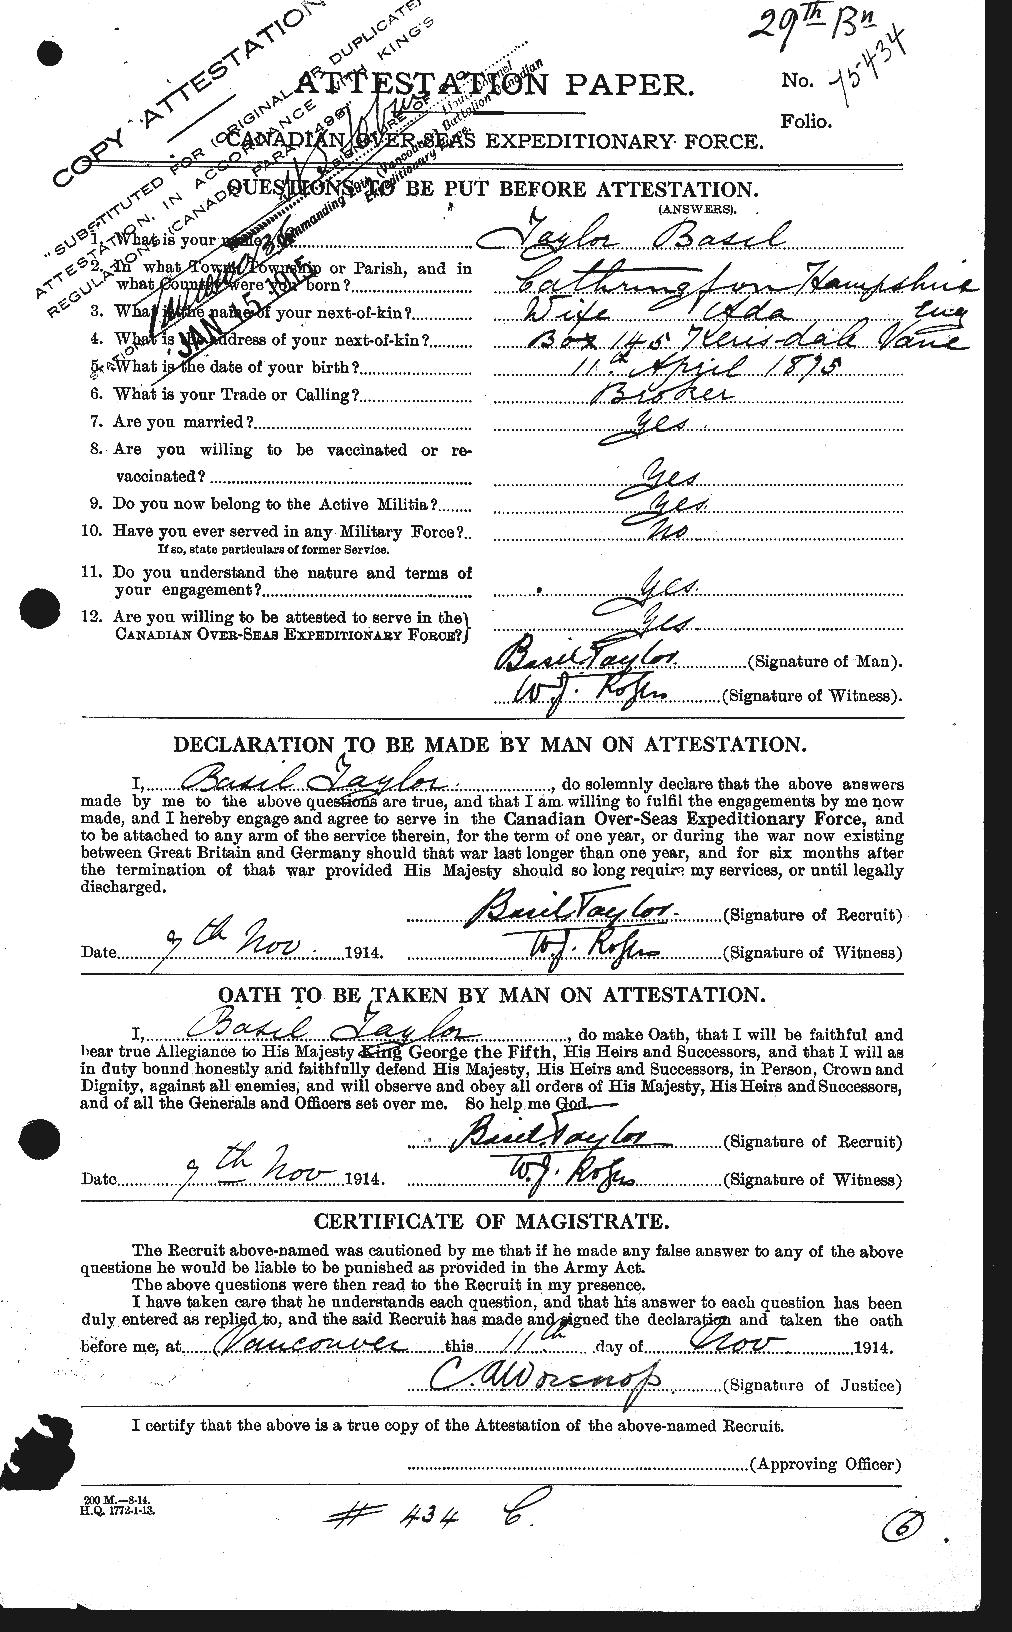 Personnel Records of the First World War - CEF 626757a